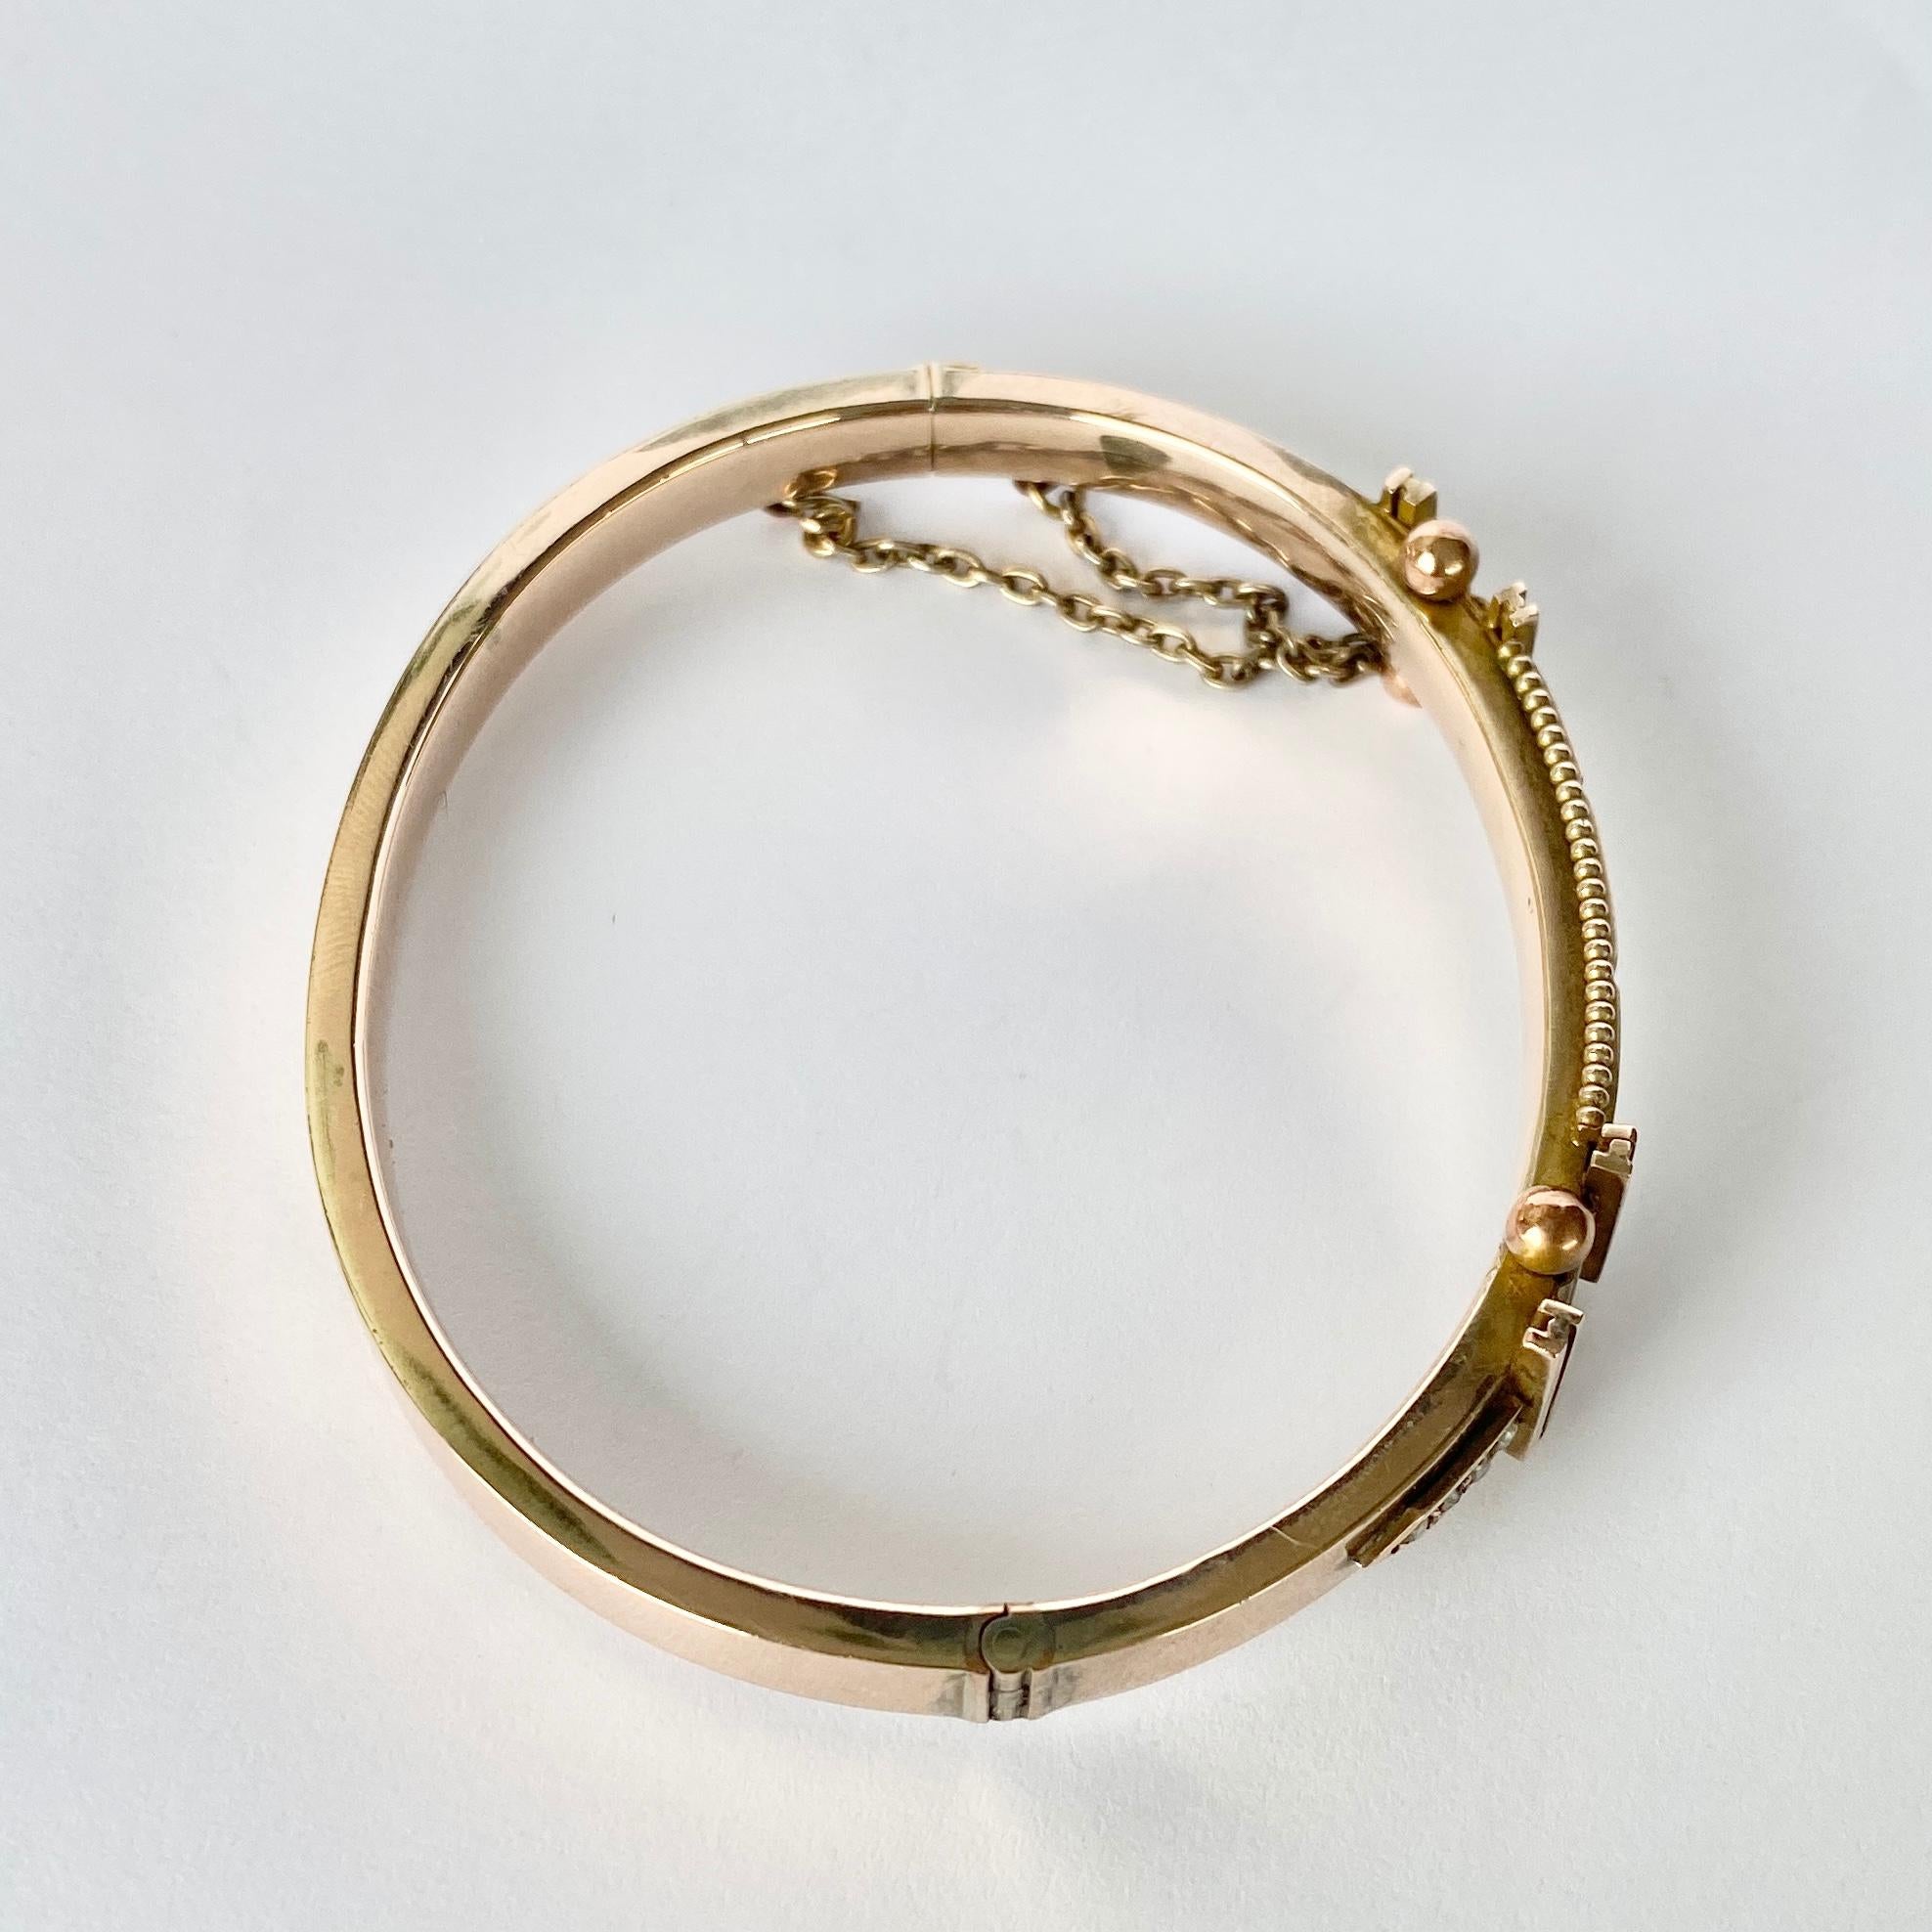 The detailed bangle holds one diamonds and two rubes set in square settings. The diamond measures 10pts and the ruby total is 15pts. The detail on this bangle is stunning and so intricate. Modelled in 9ct gold.

Inner Diameter: 59mm
Bangle Width: